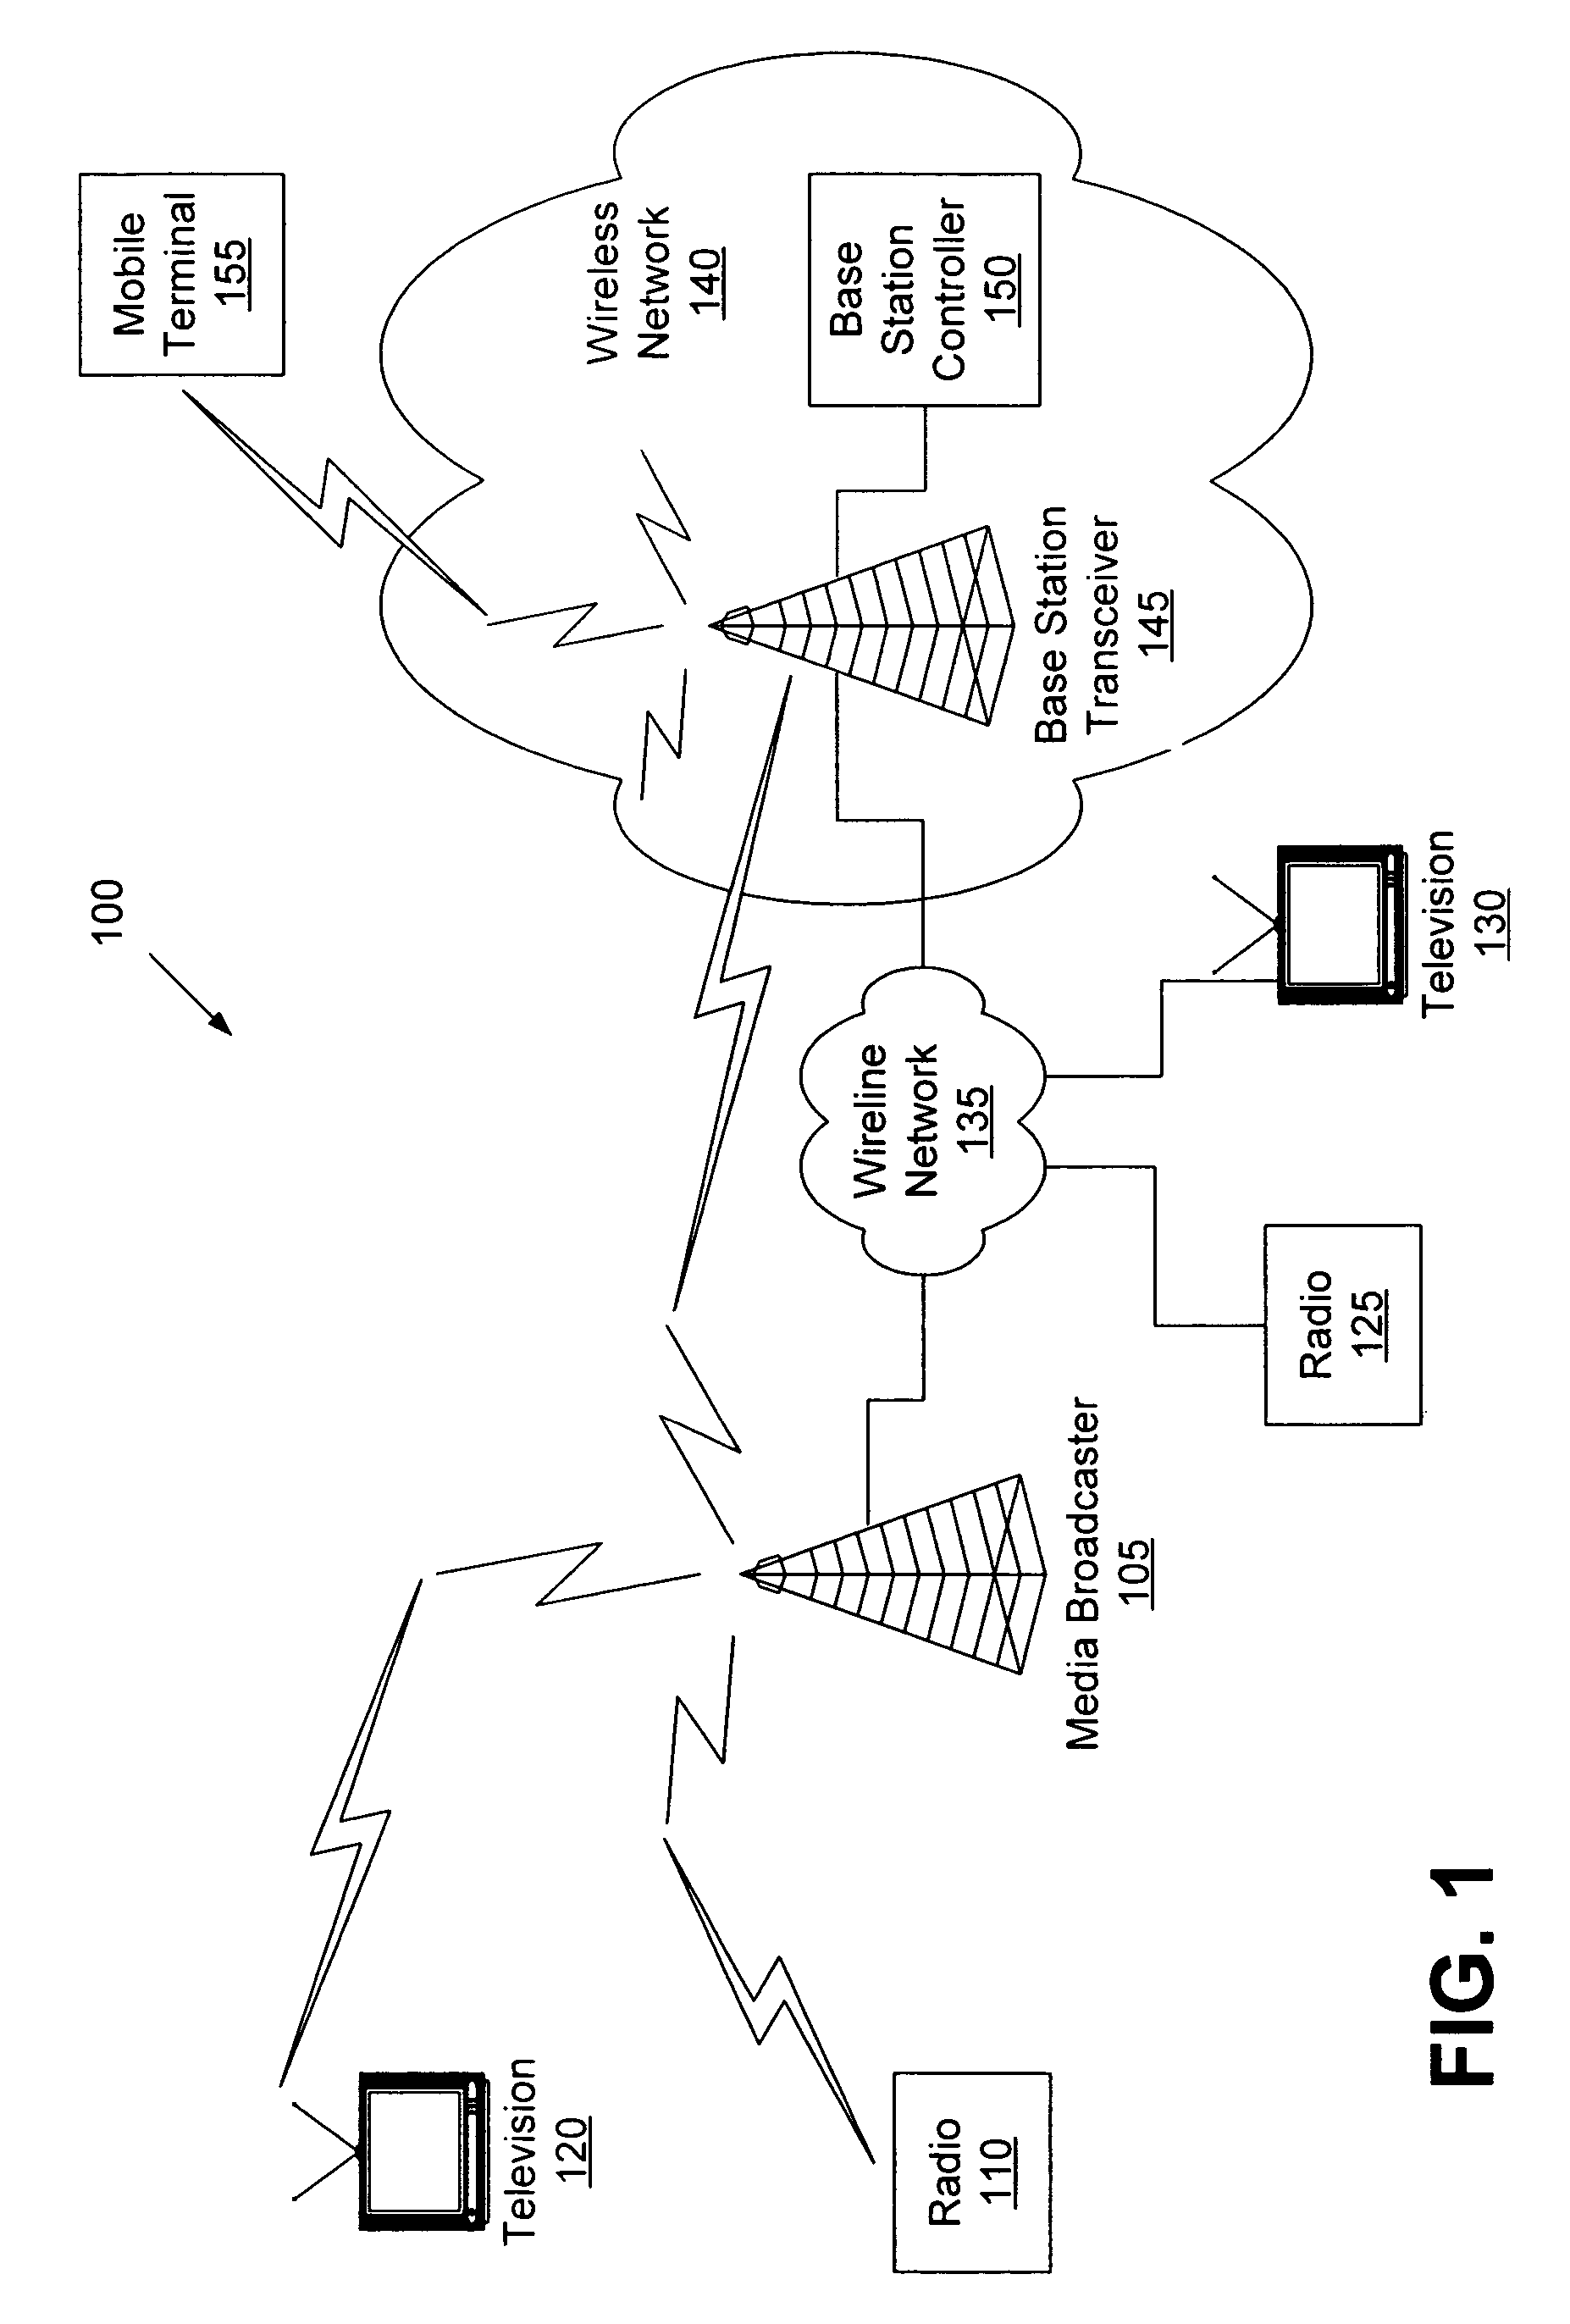 Methods, systems, and computer program products for transmitting streaming media to a mobile terminal using the bandwidth associated with a wireless network